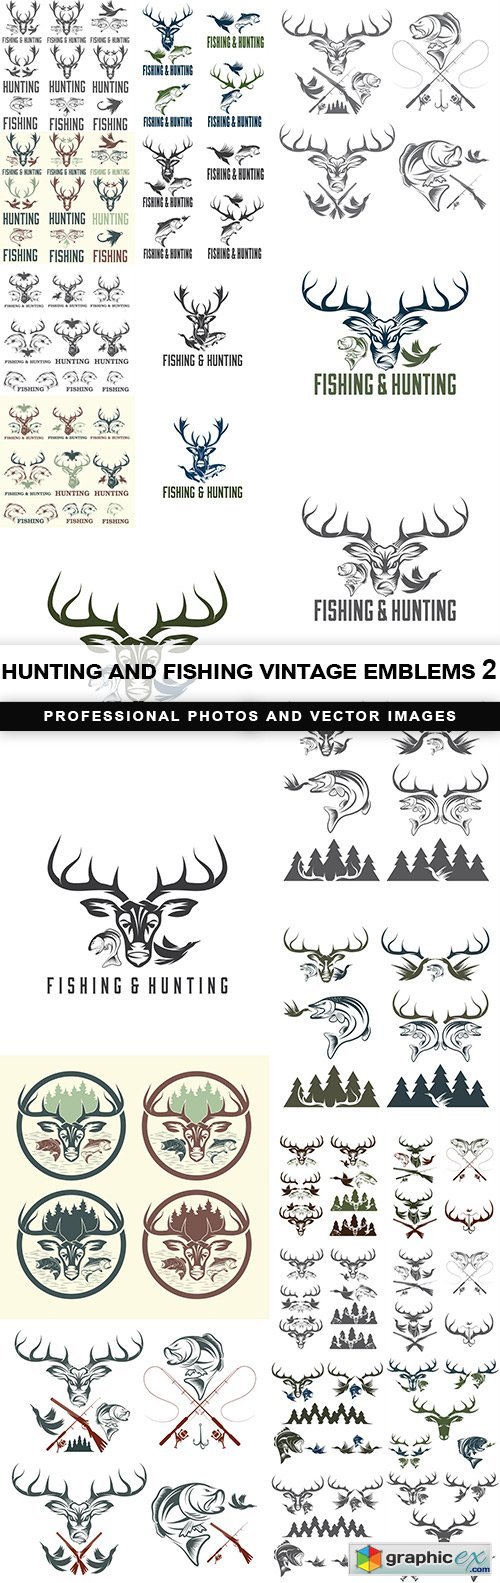 Hunting and fishing vintage emblems 2